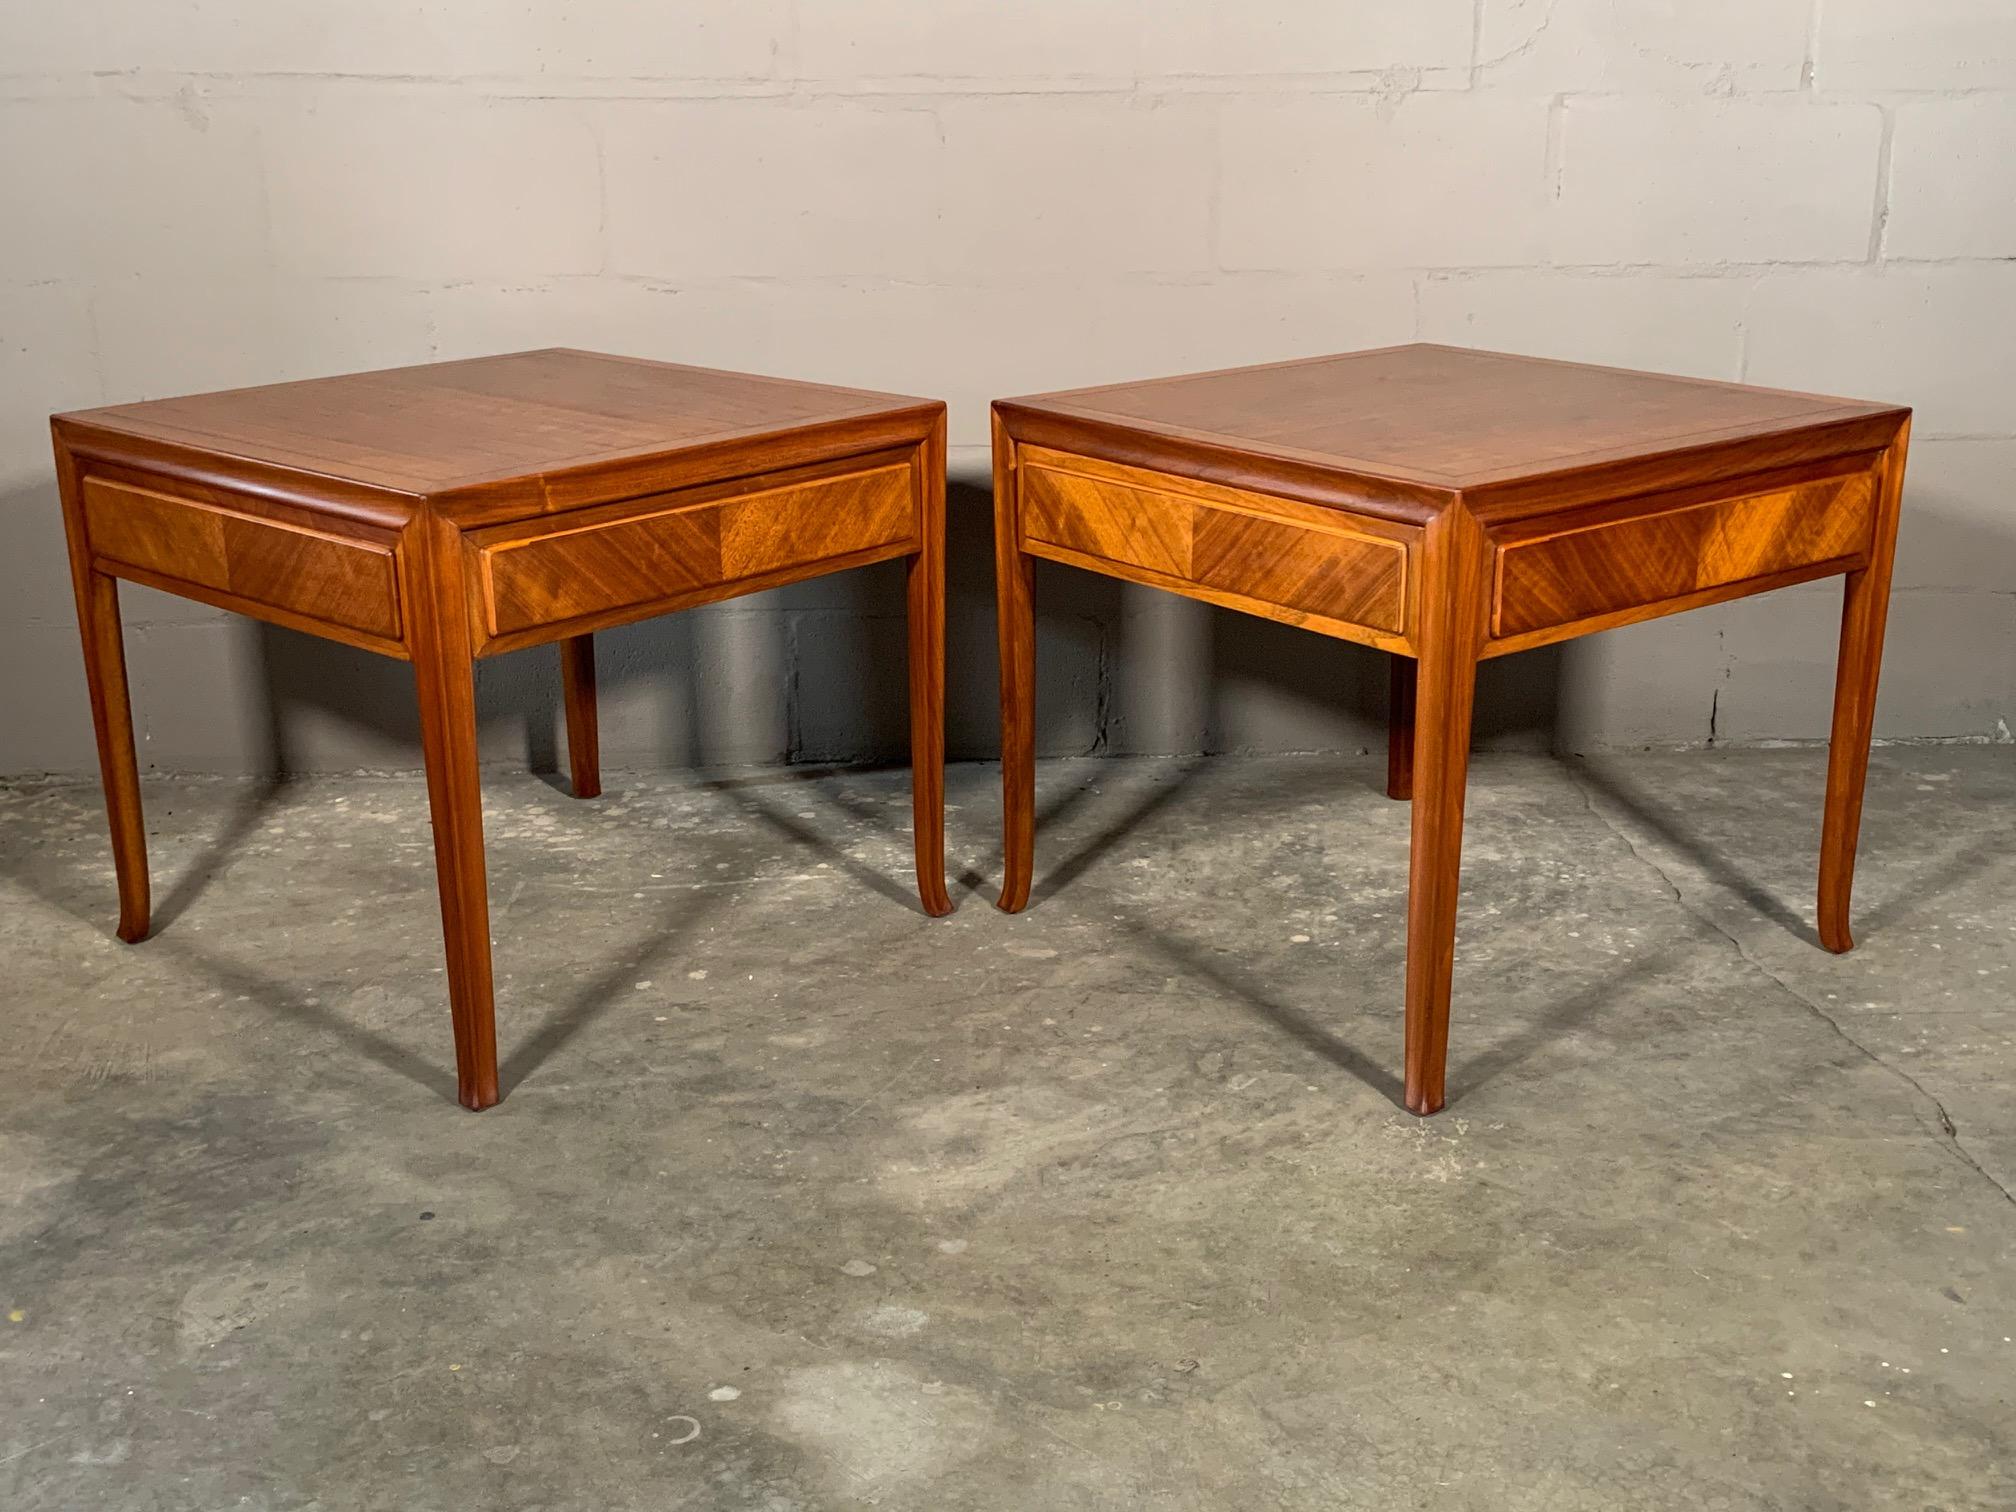 A pair of rare side tables or night stands by T.H.Robsjohn-Gibbings for Baker, circa 1961. Large scale at 25